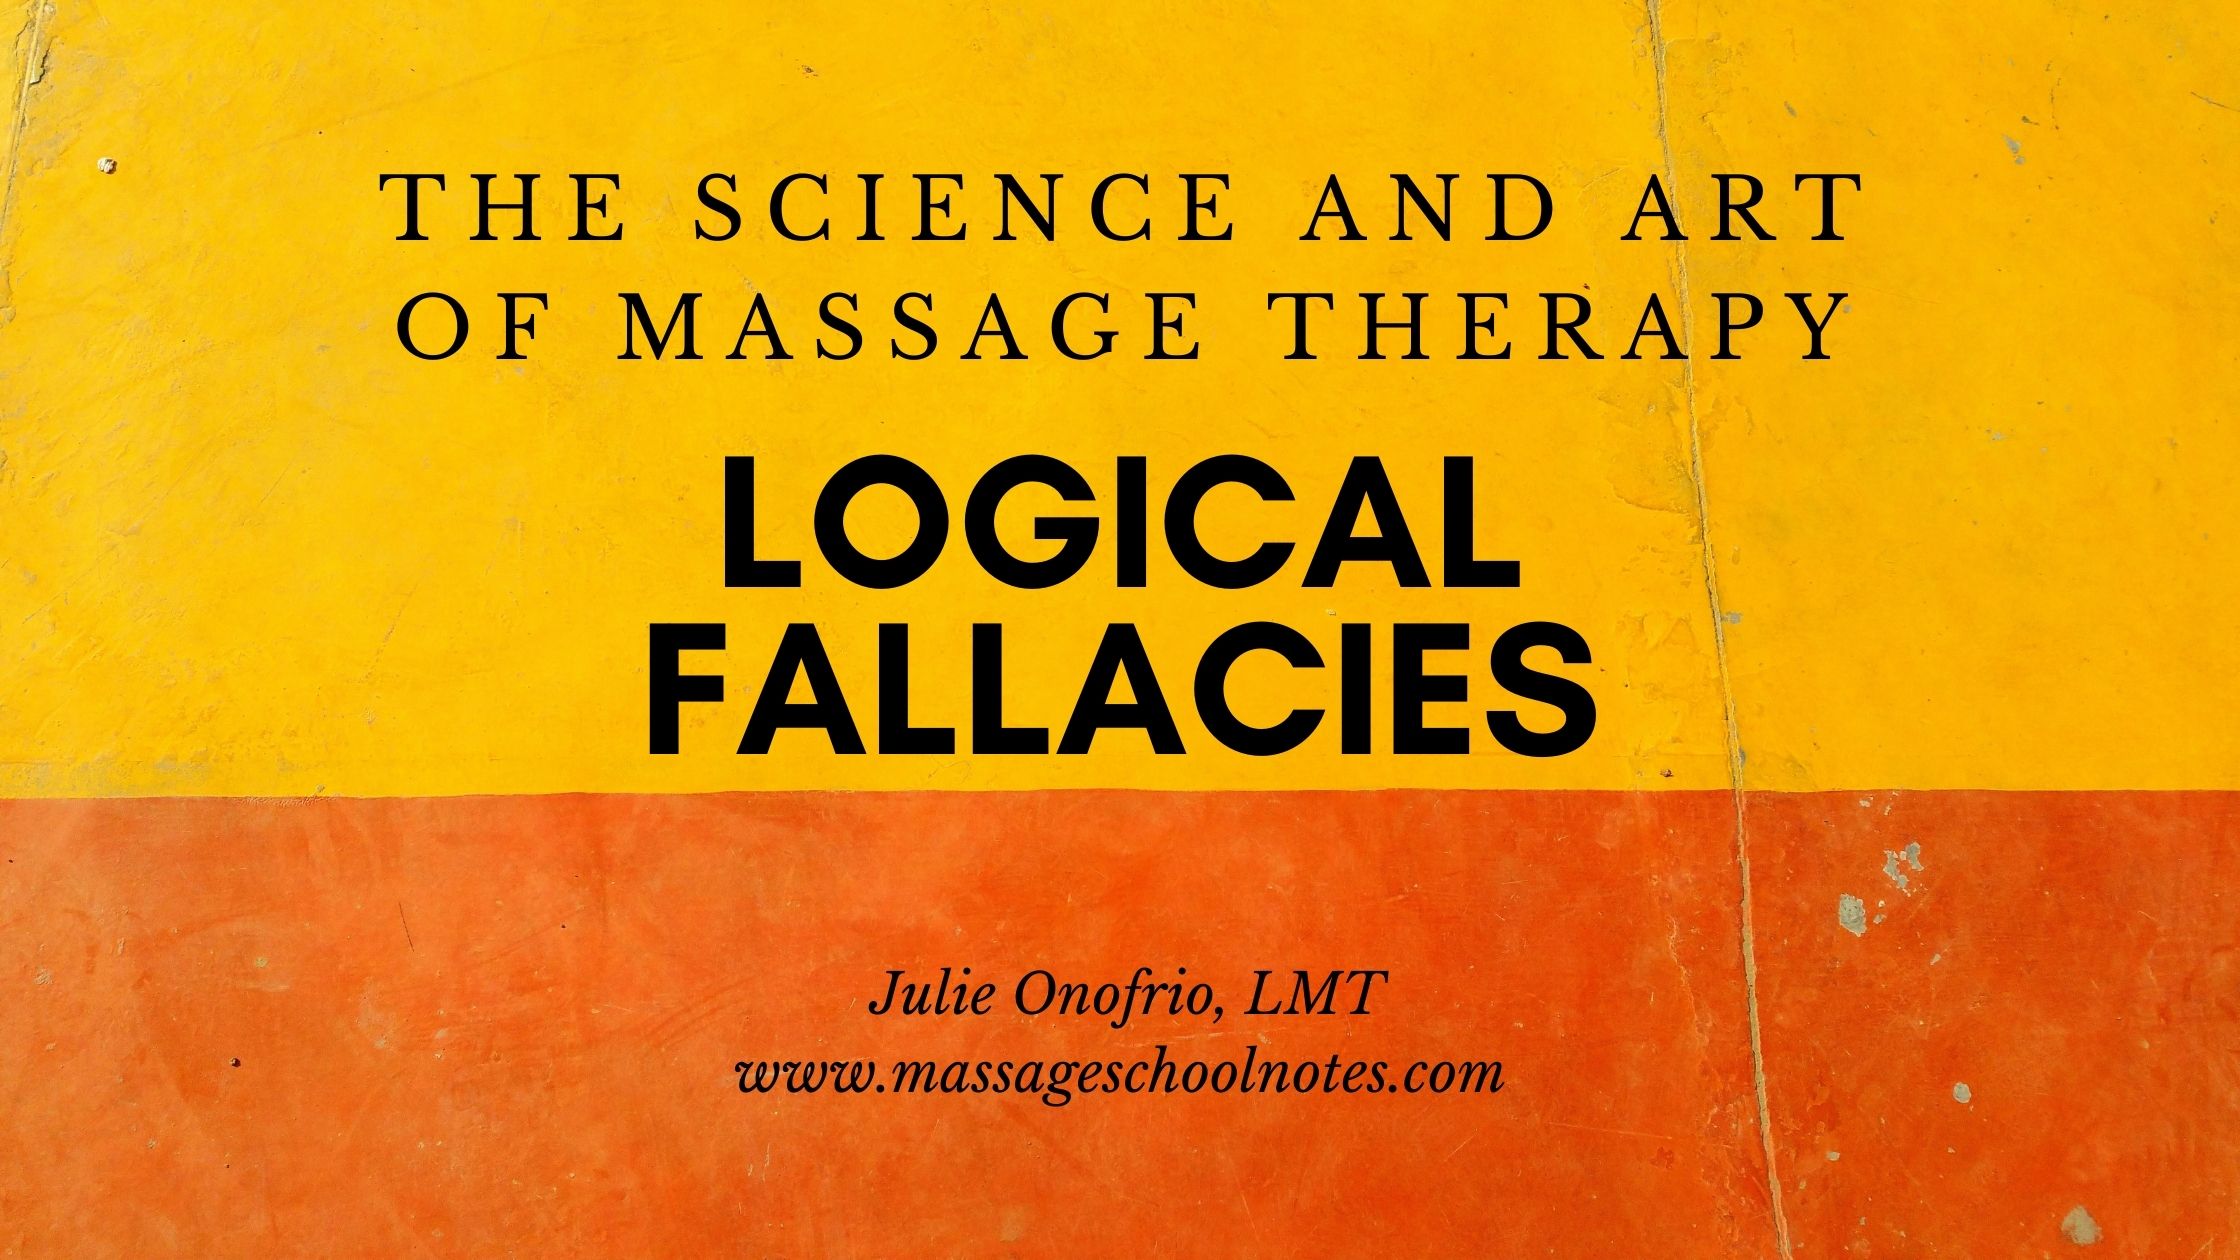 understanding logical fallacies for massage therapists